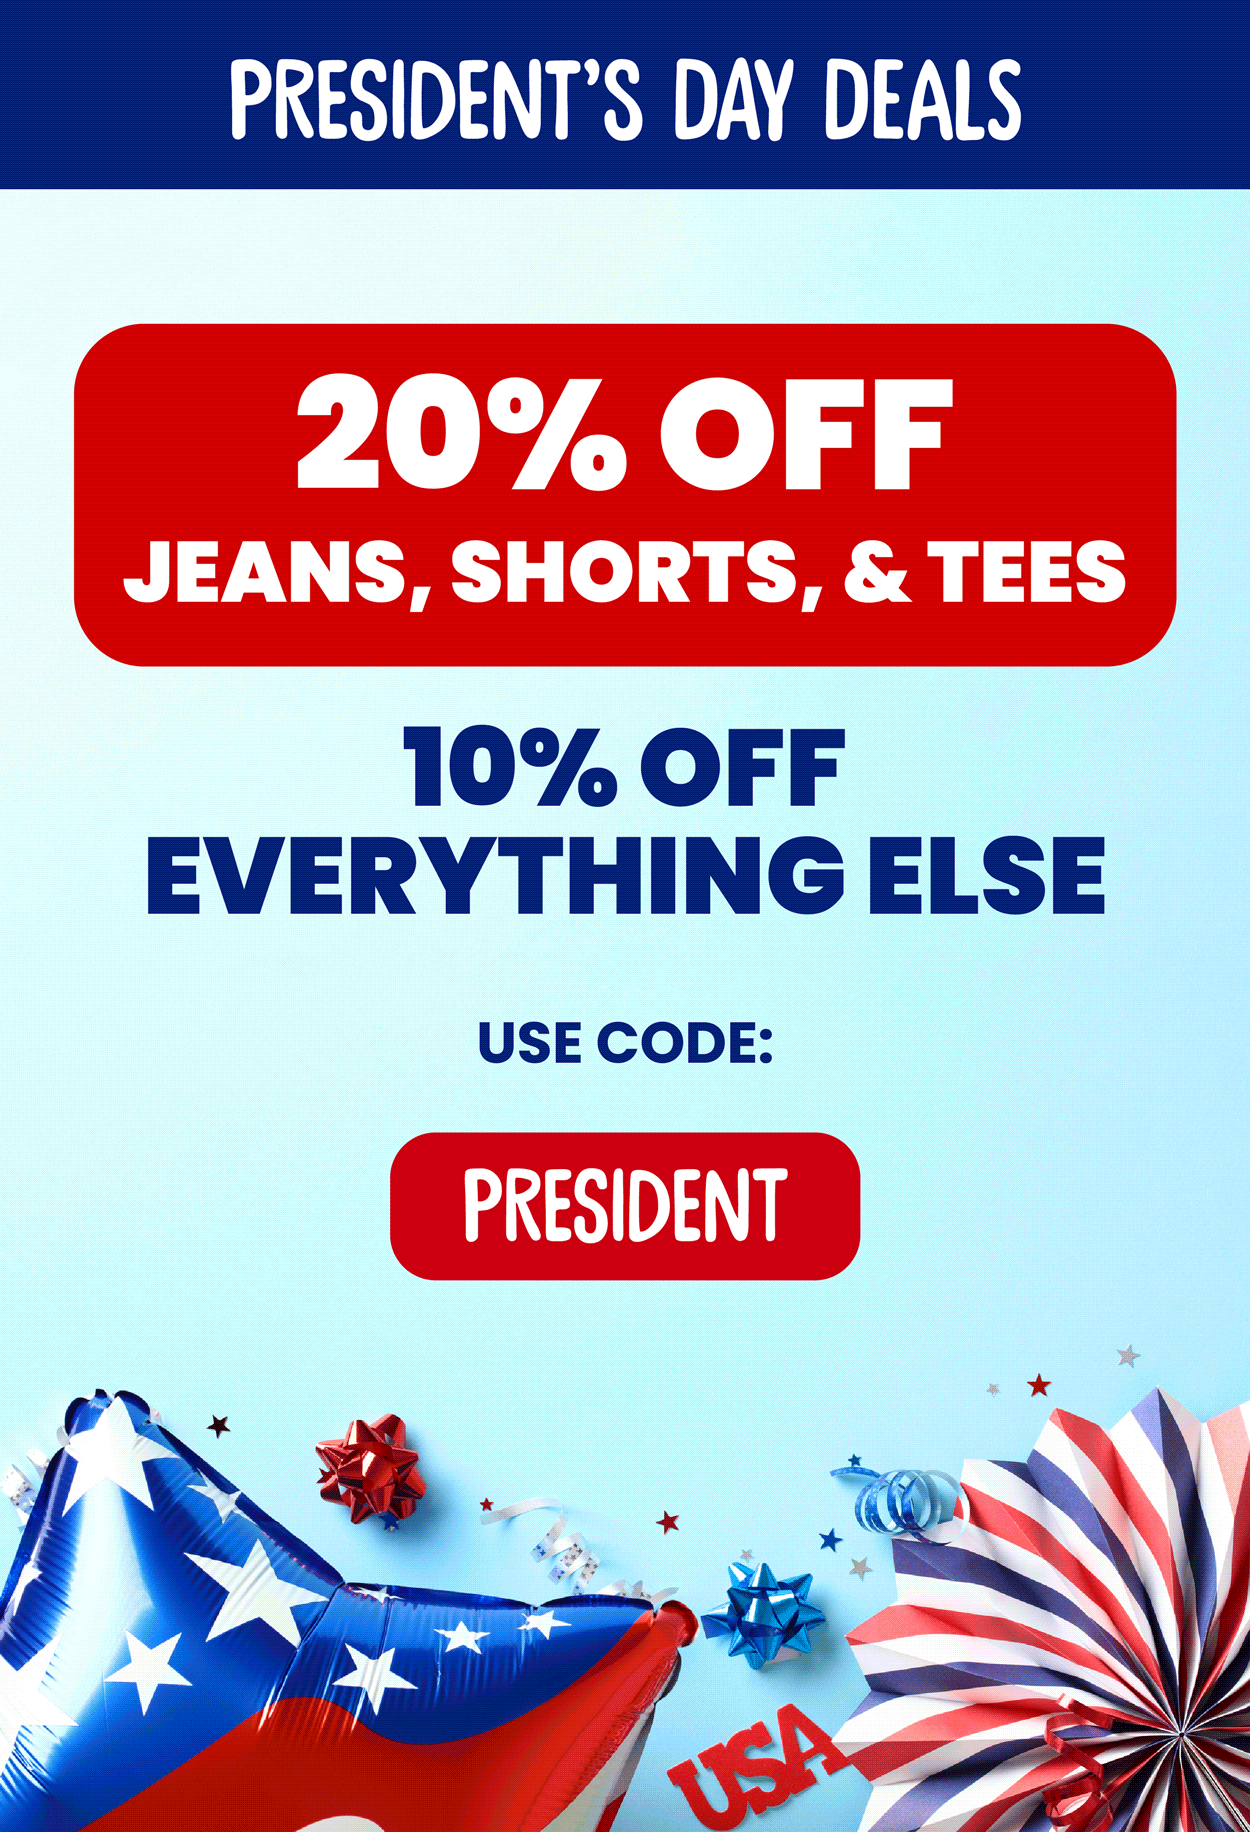 President's Day Sale: 20% Off Jeans, Shorts and T's and 10% Off Everything Else